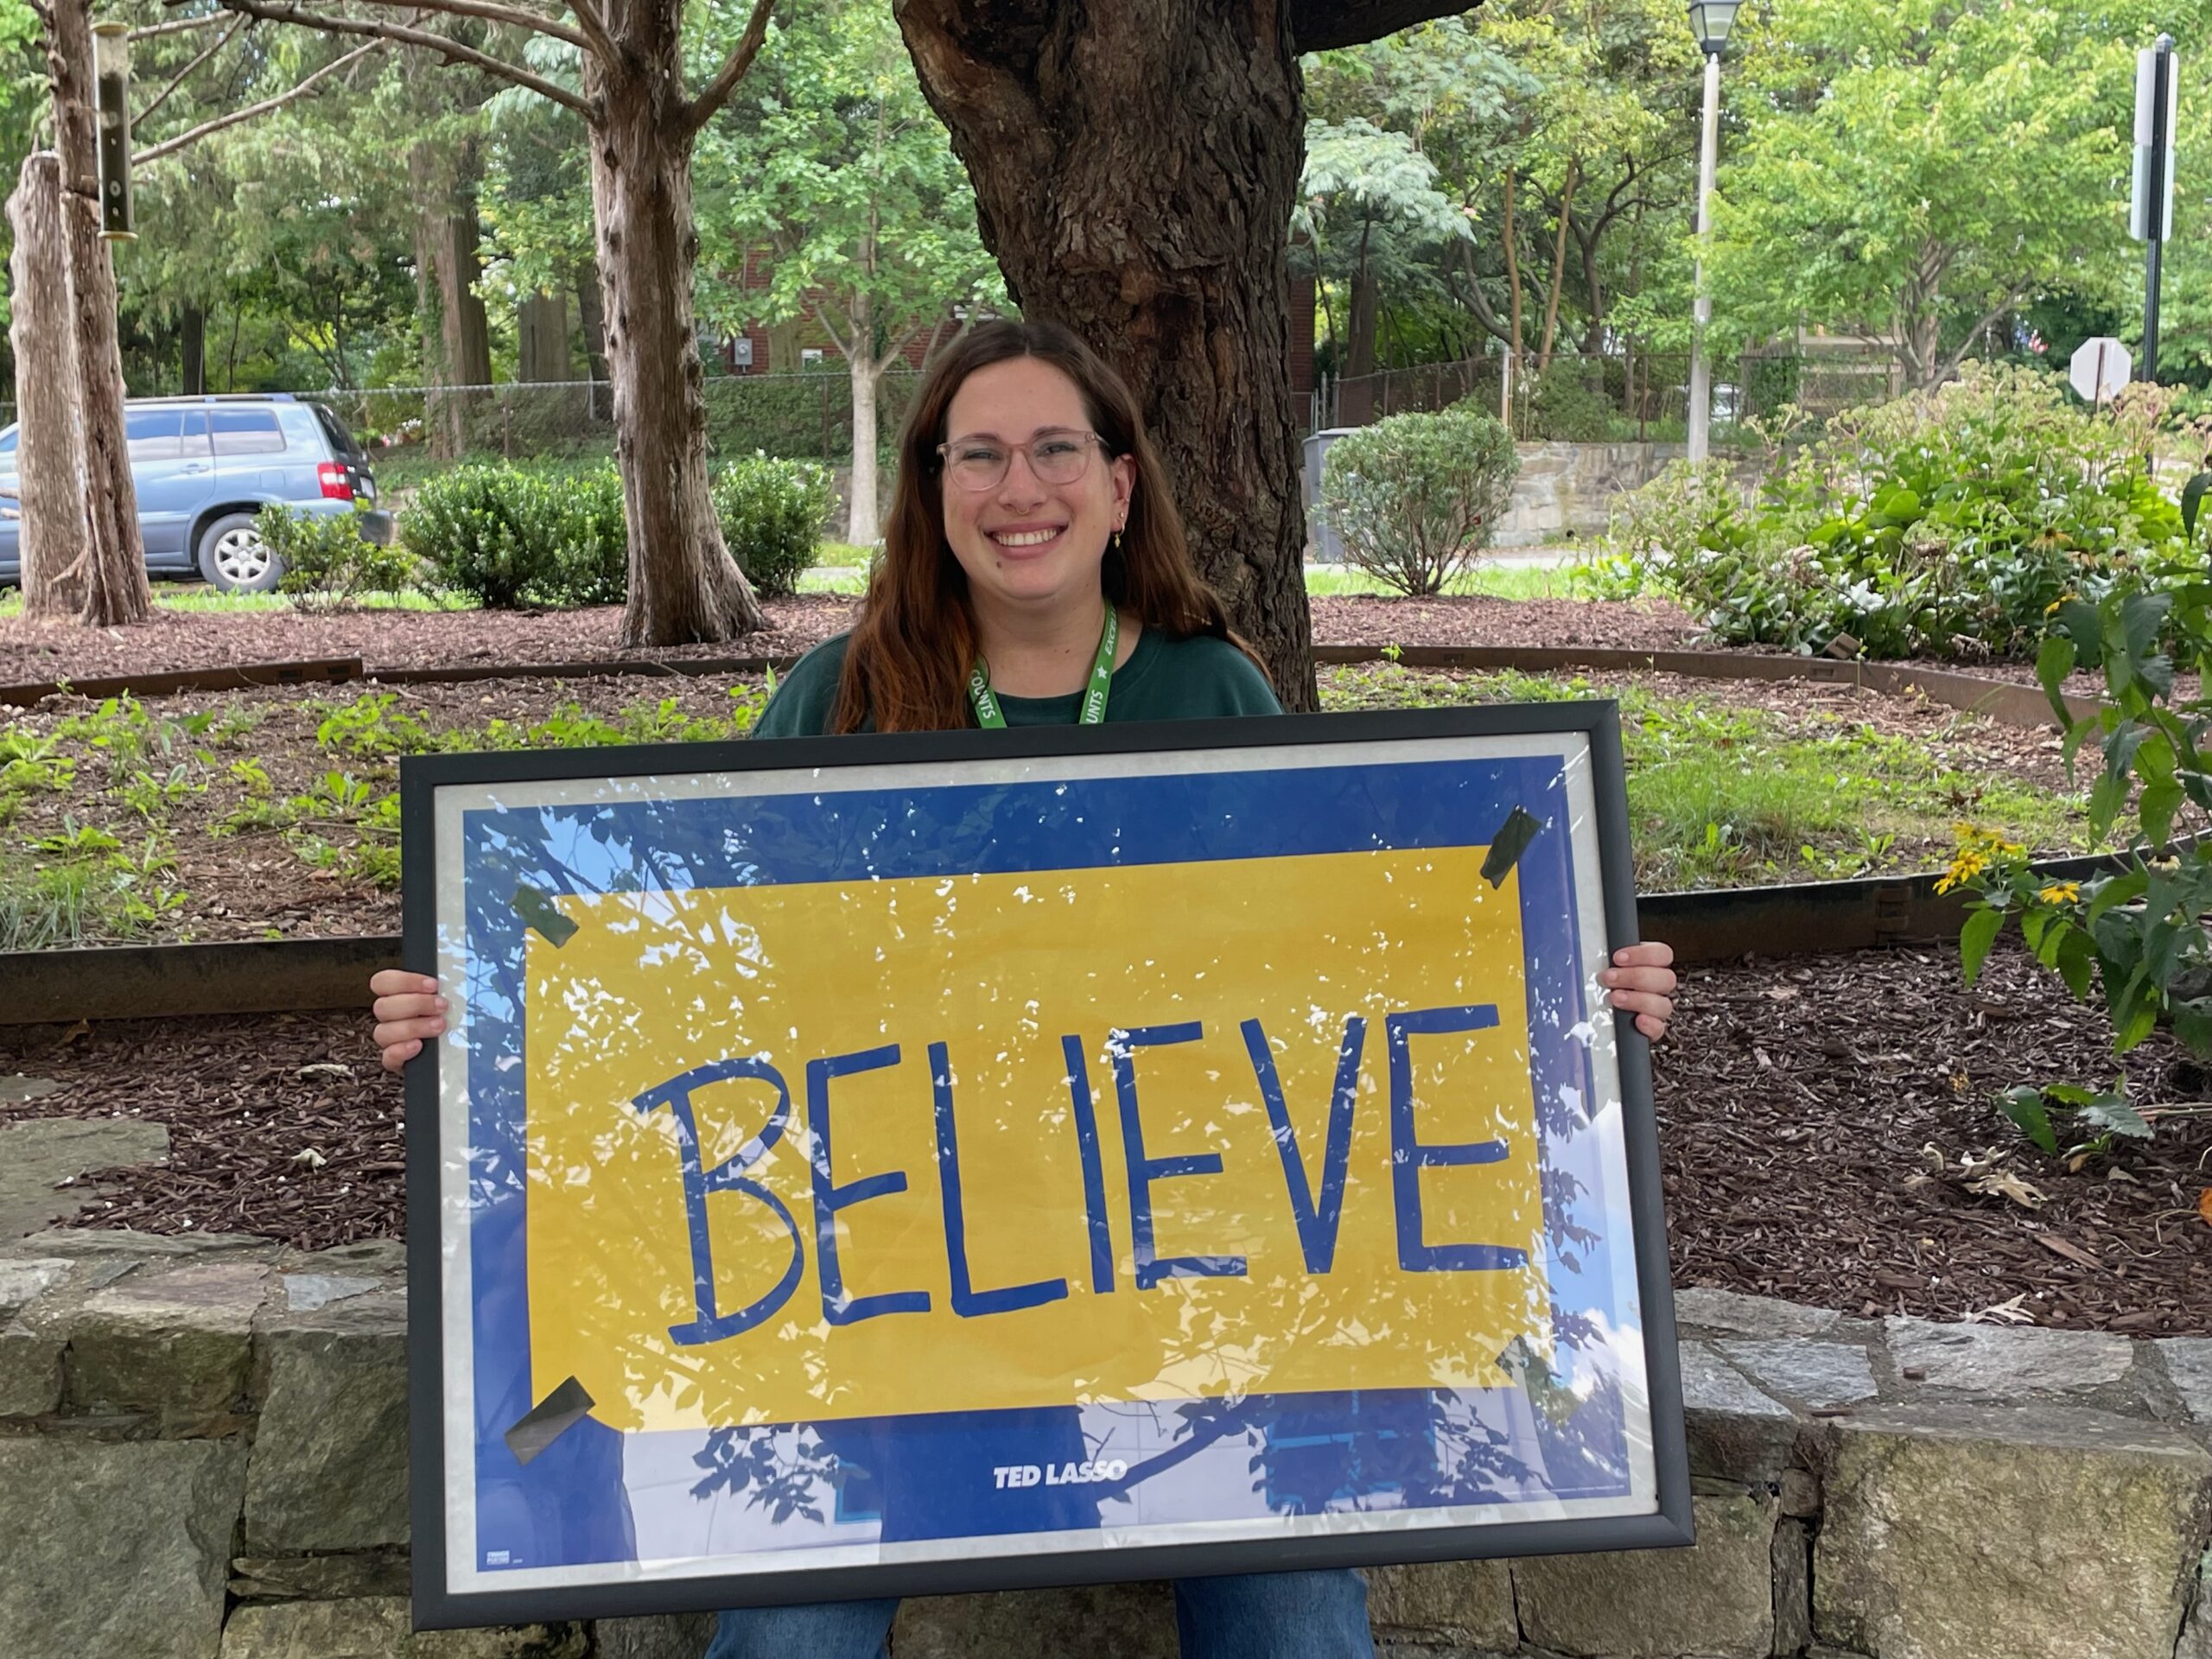 Photo of Ms. Mintzer holding a sign that says "BELIEVE" from the tv show Ted Lasso.